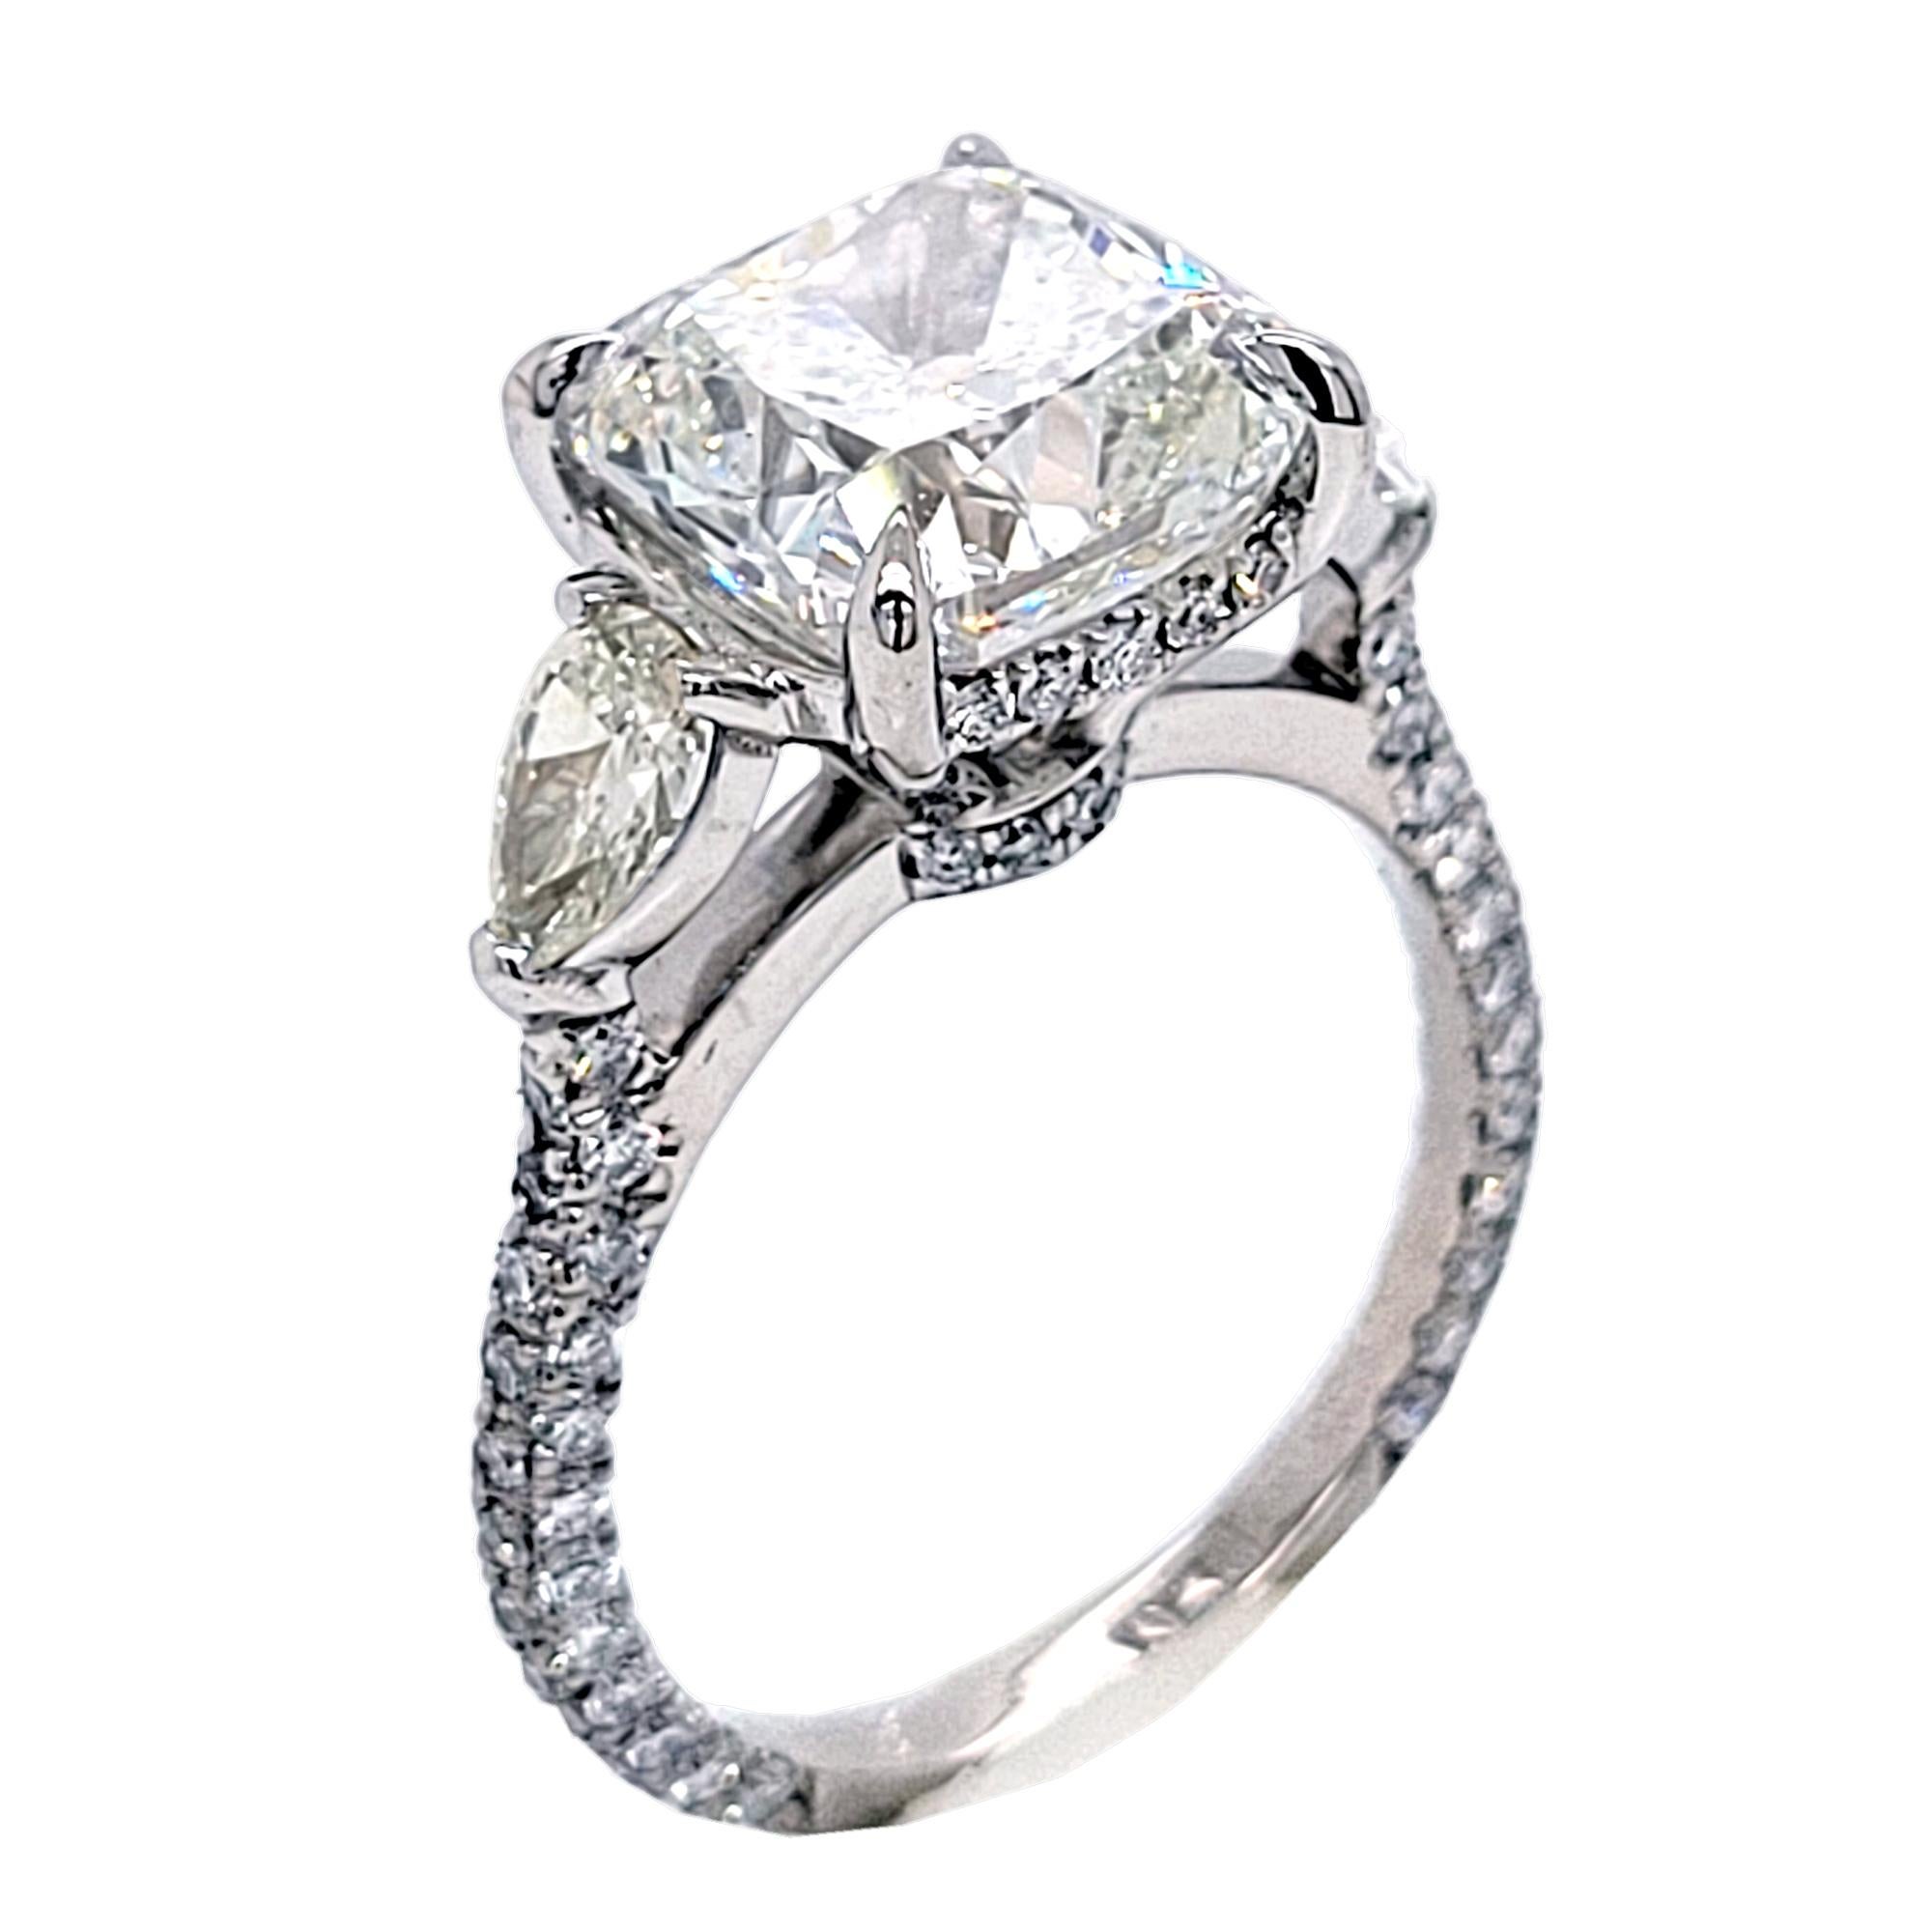 A beautiful GIA Certified 4.75 Ct Square Cushion Cut I/VS1 center Diamond set in a fine Pave Set Platinum 3 stone Engagement Ring with 2 Pear Shape diamonds the side with Hidden Halo. Total diamond weight of 1.29 Ct. diamonds on the side. 

Diamond